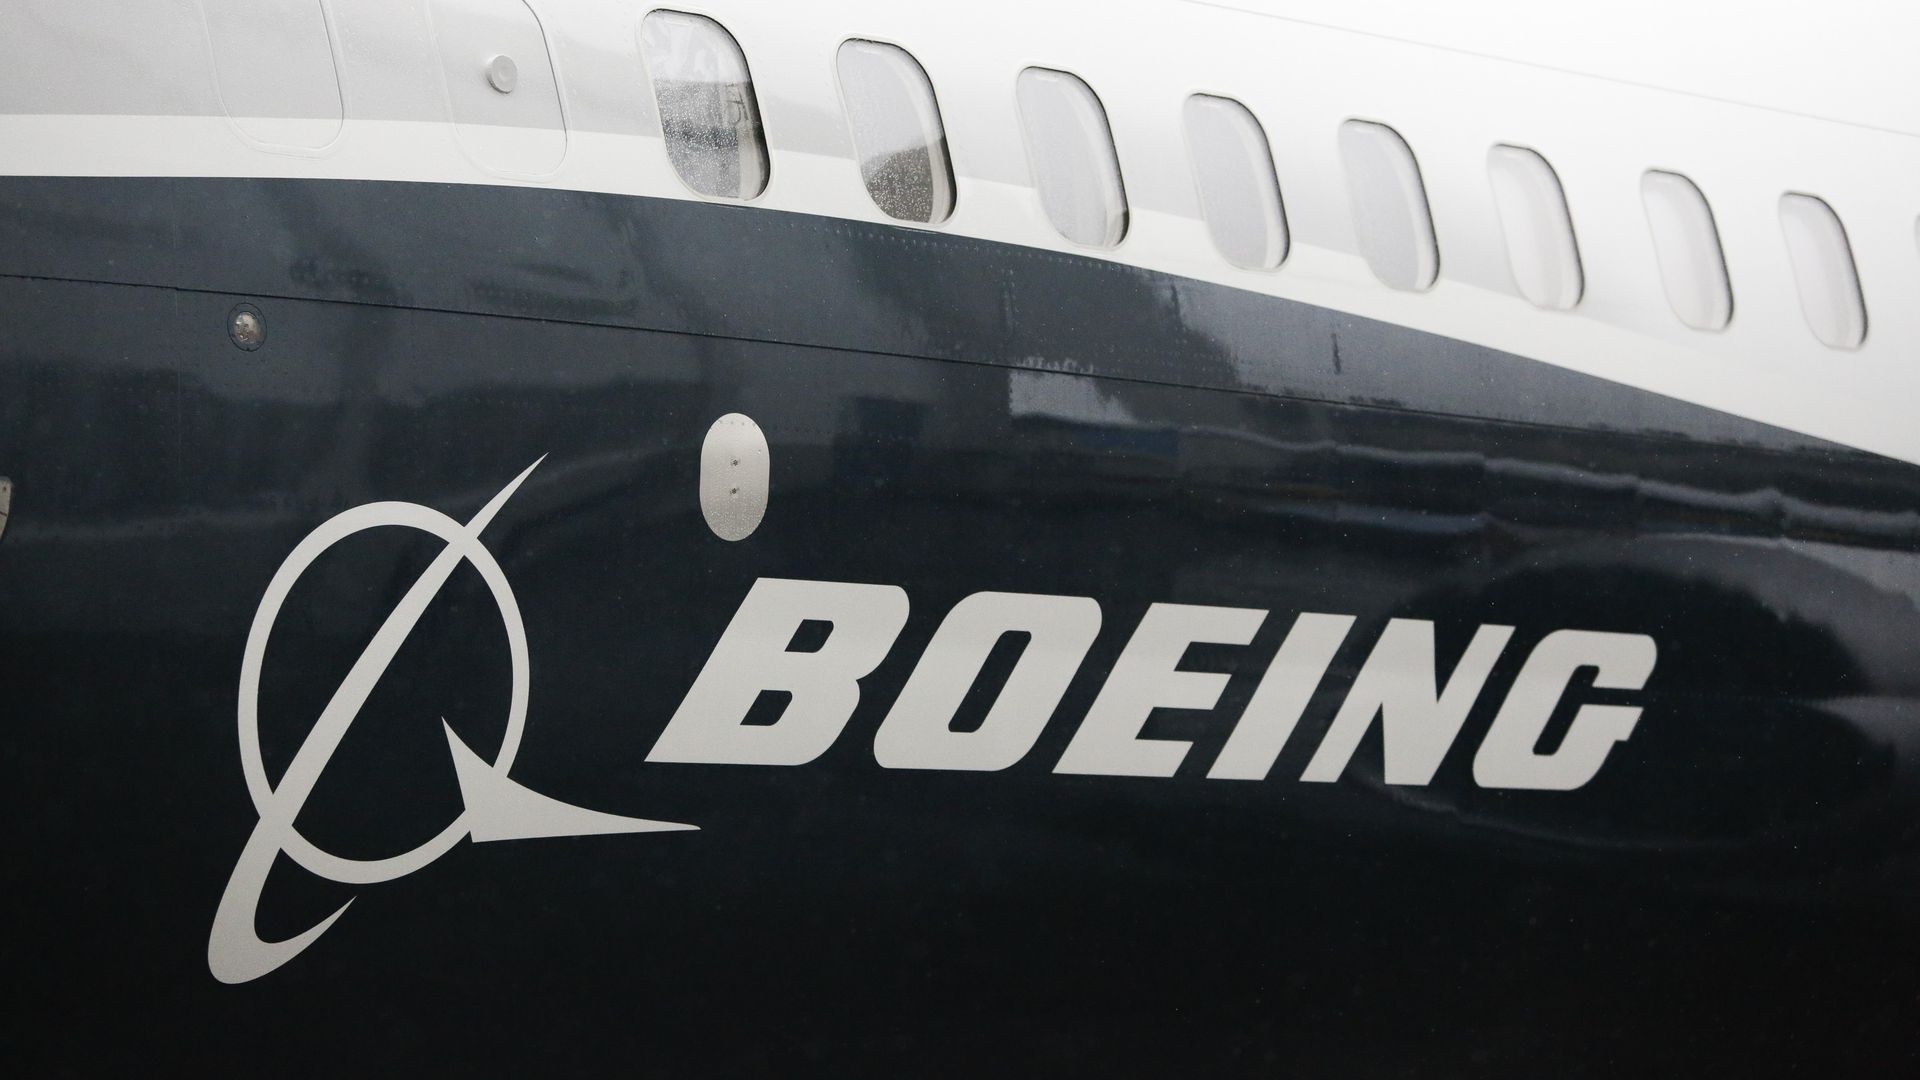 The Boeing logo on the first Boeing 737 MAX 9 airplane